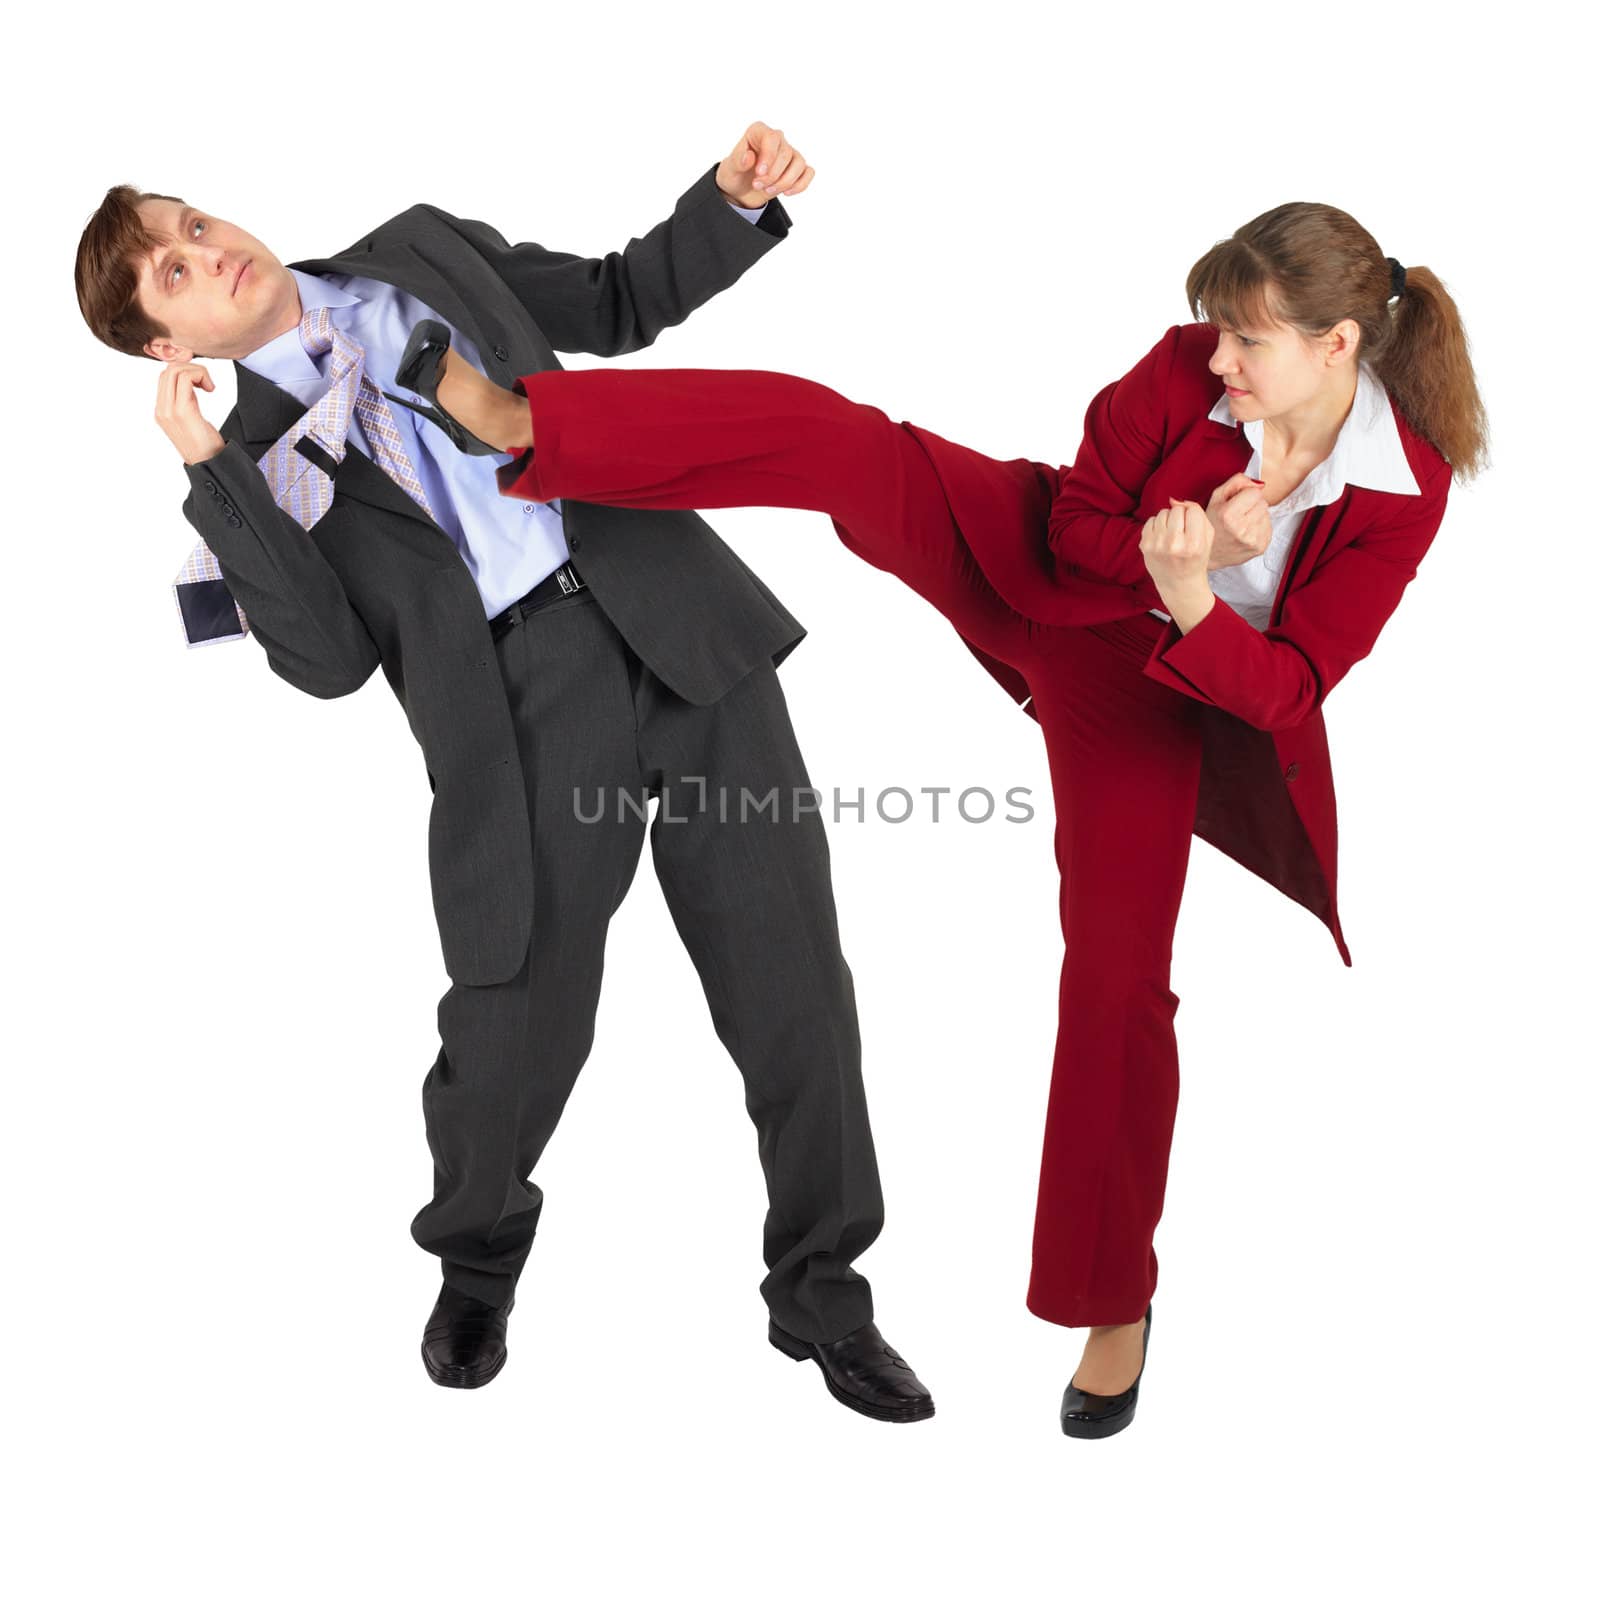 The young woman kicks the man in a business suit